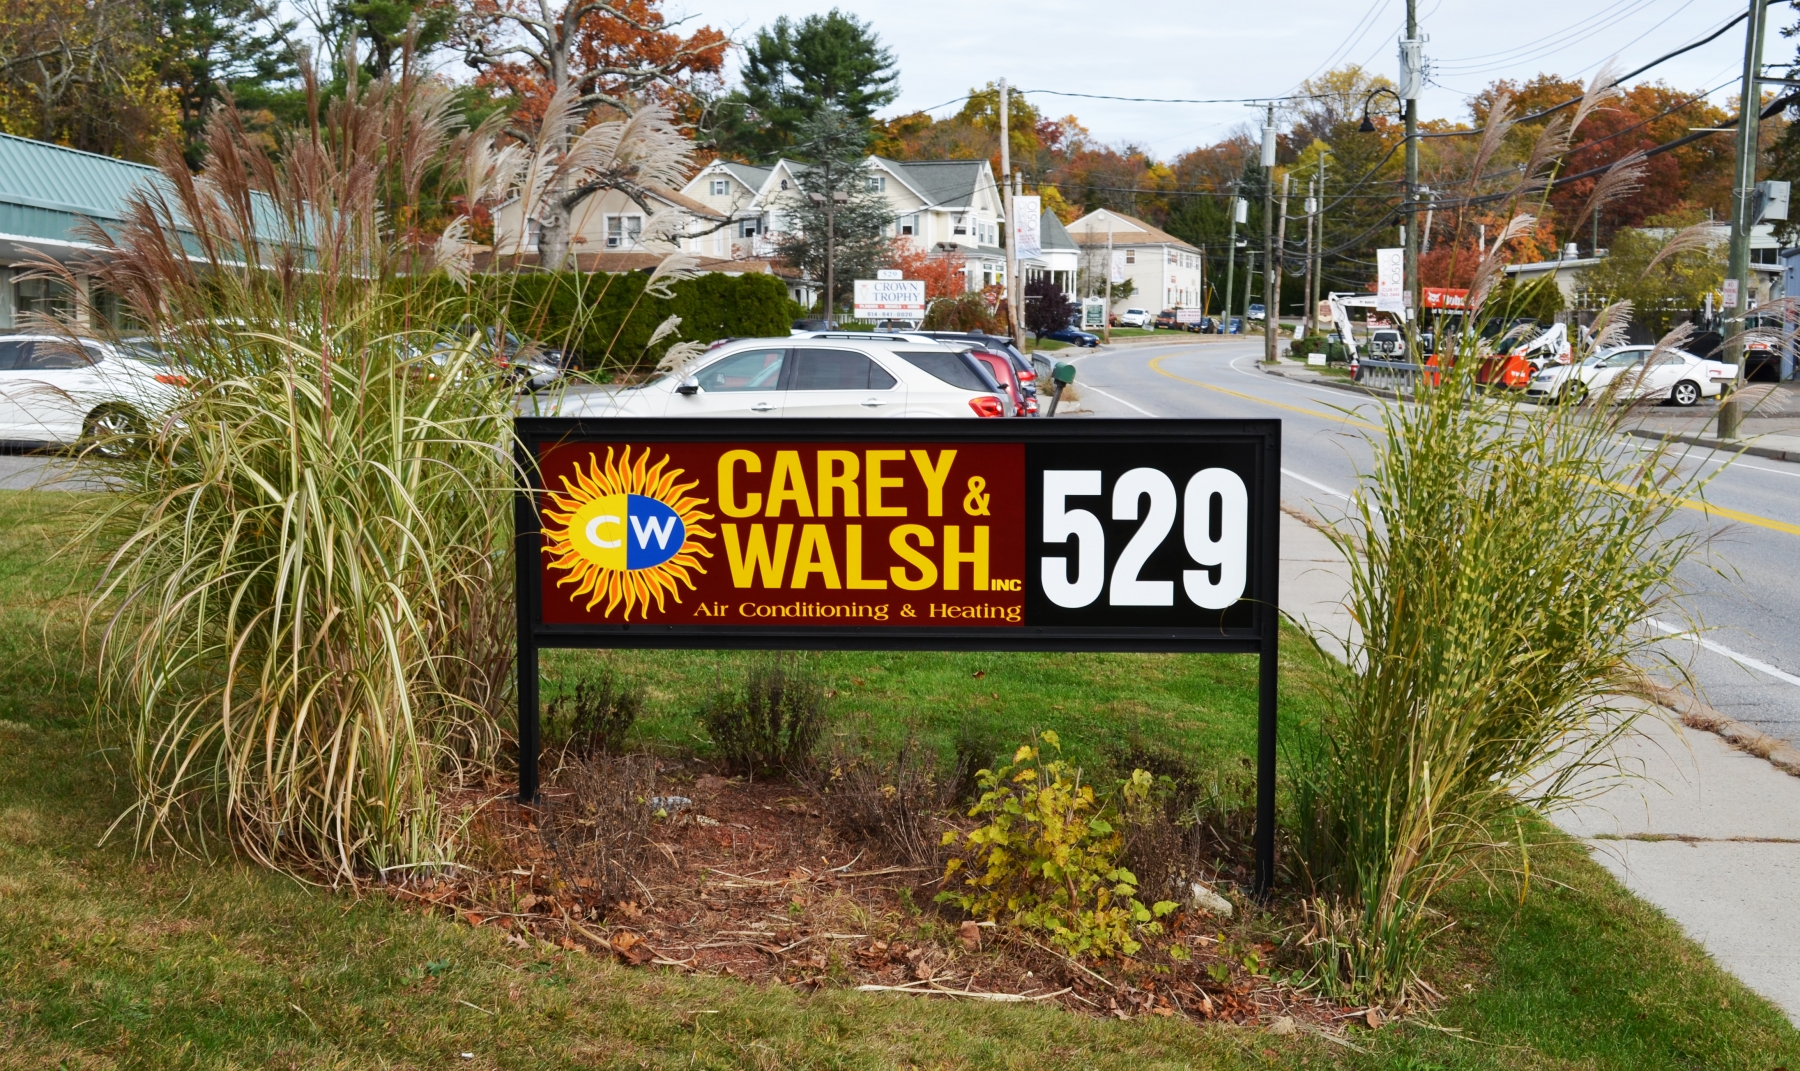 Carey & Walsh, Inc 529 N State Rd, Briarcliff Manor New York 10510